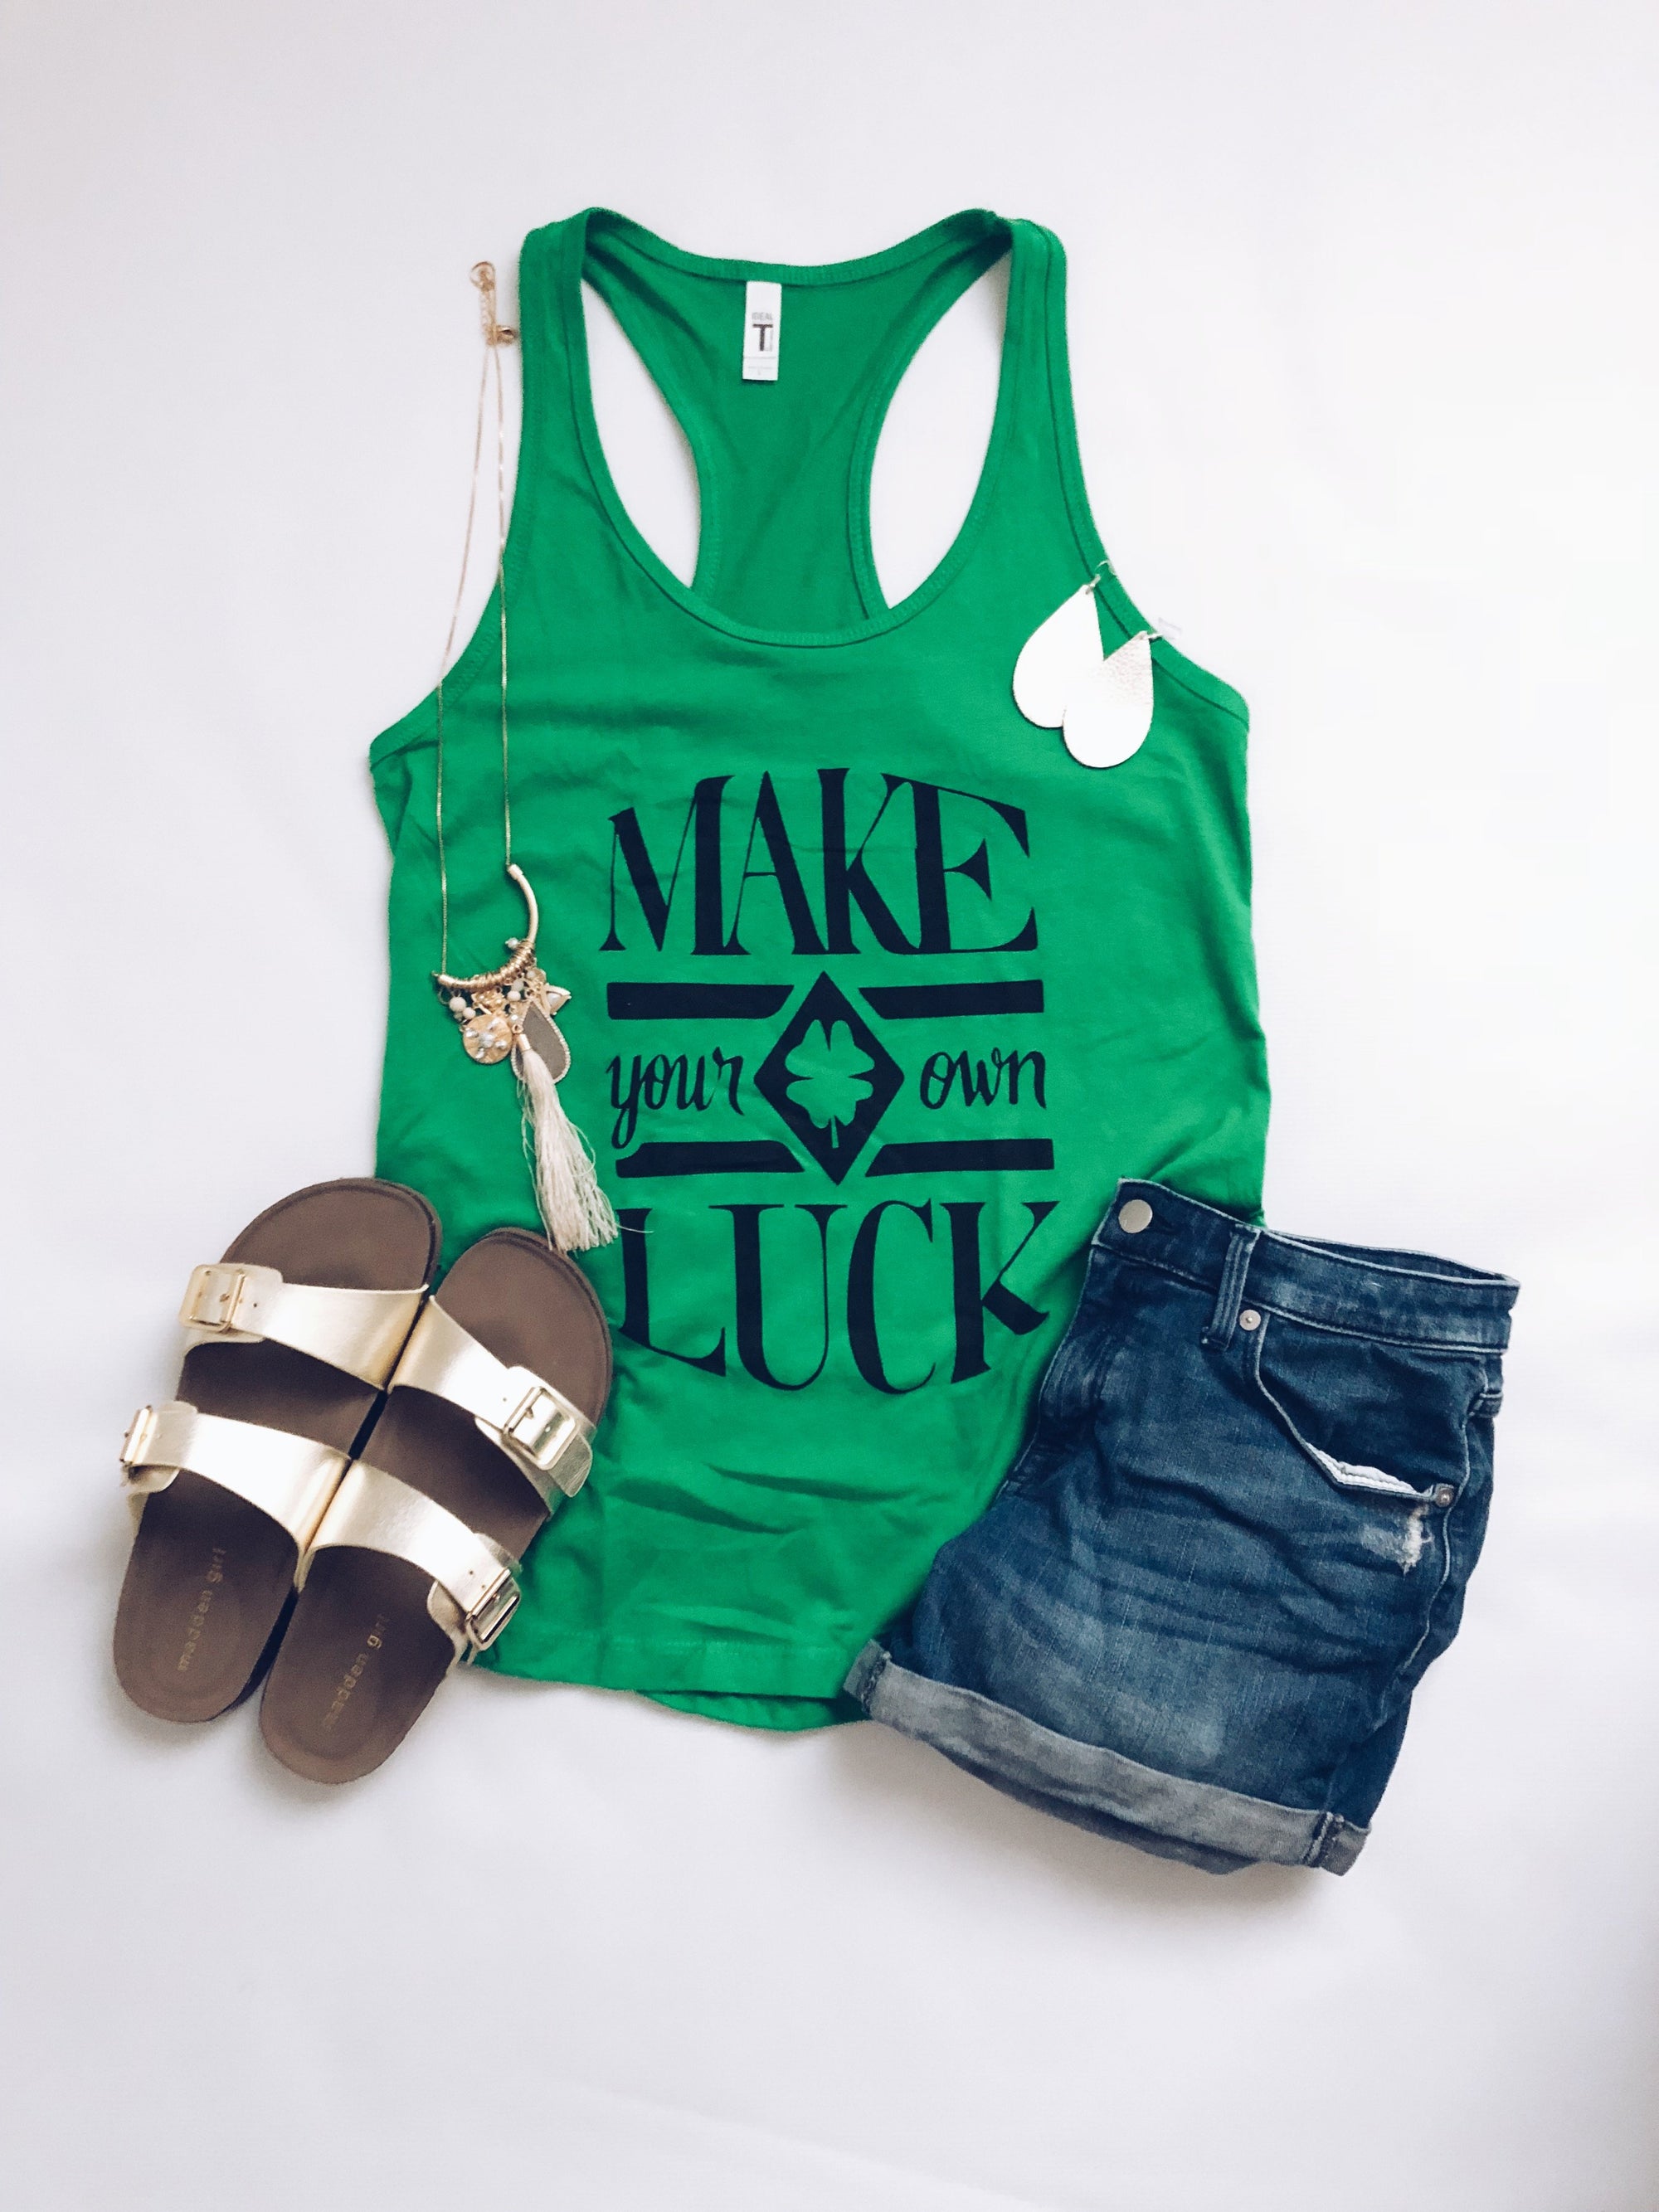 Make your own luck tank St pattys day tank Ideal fit tank Kelly green 